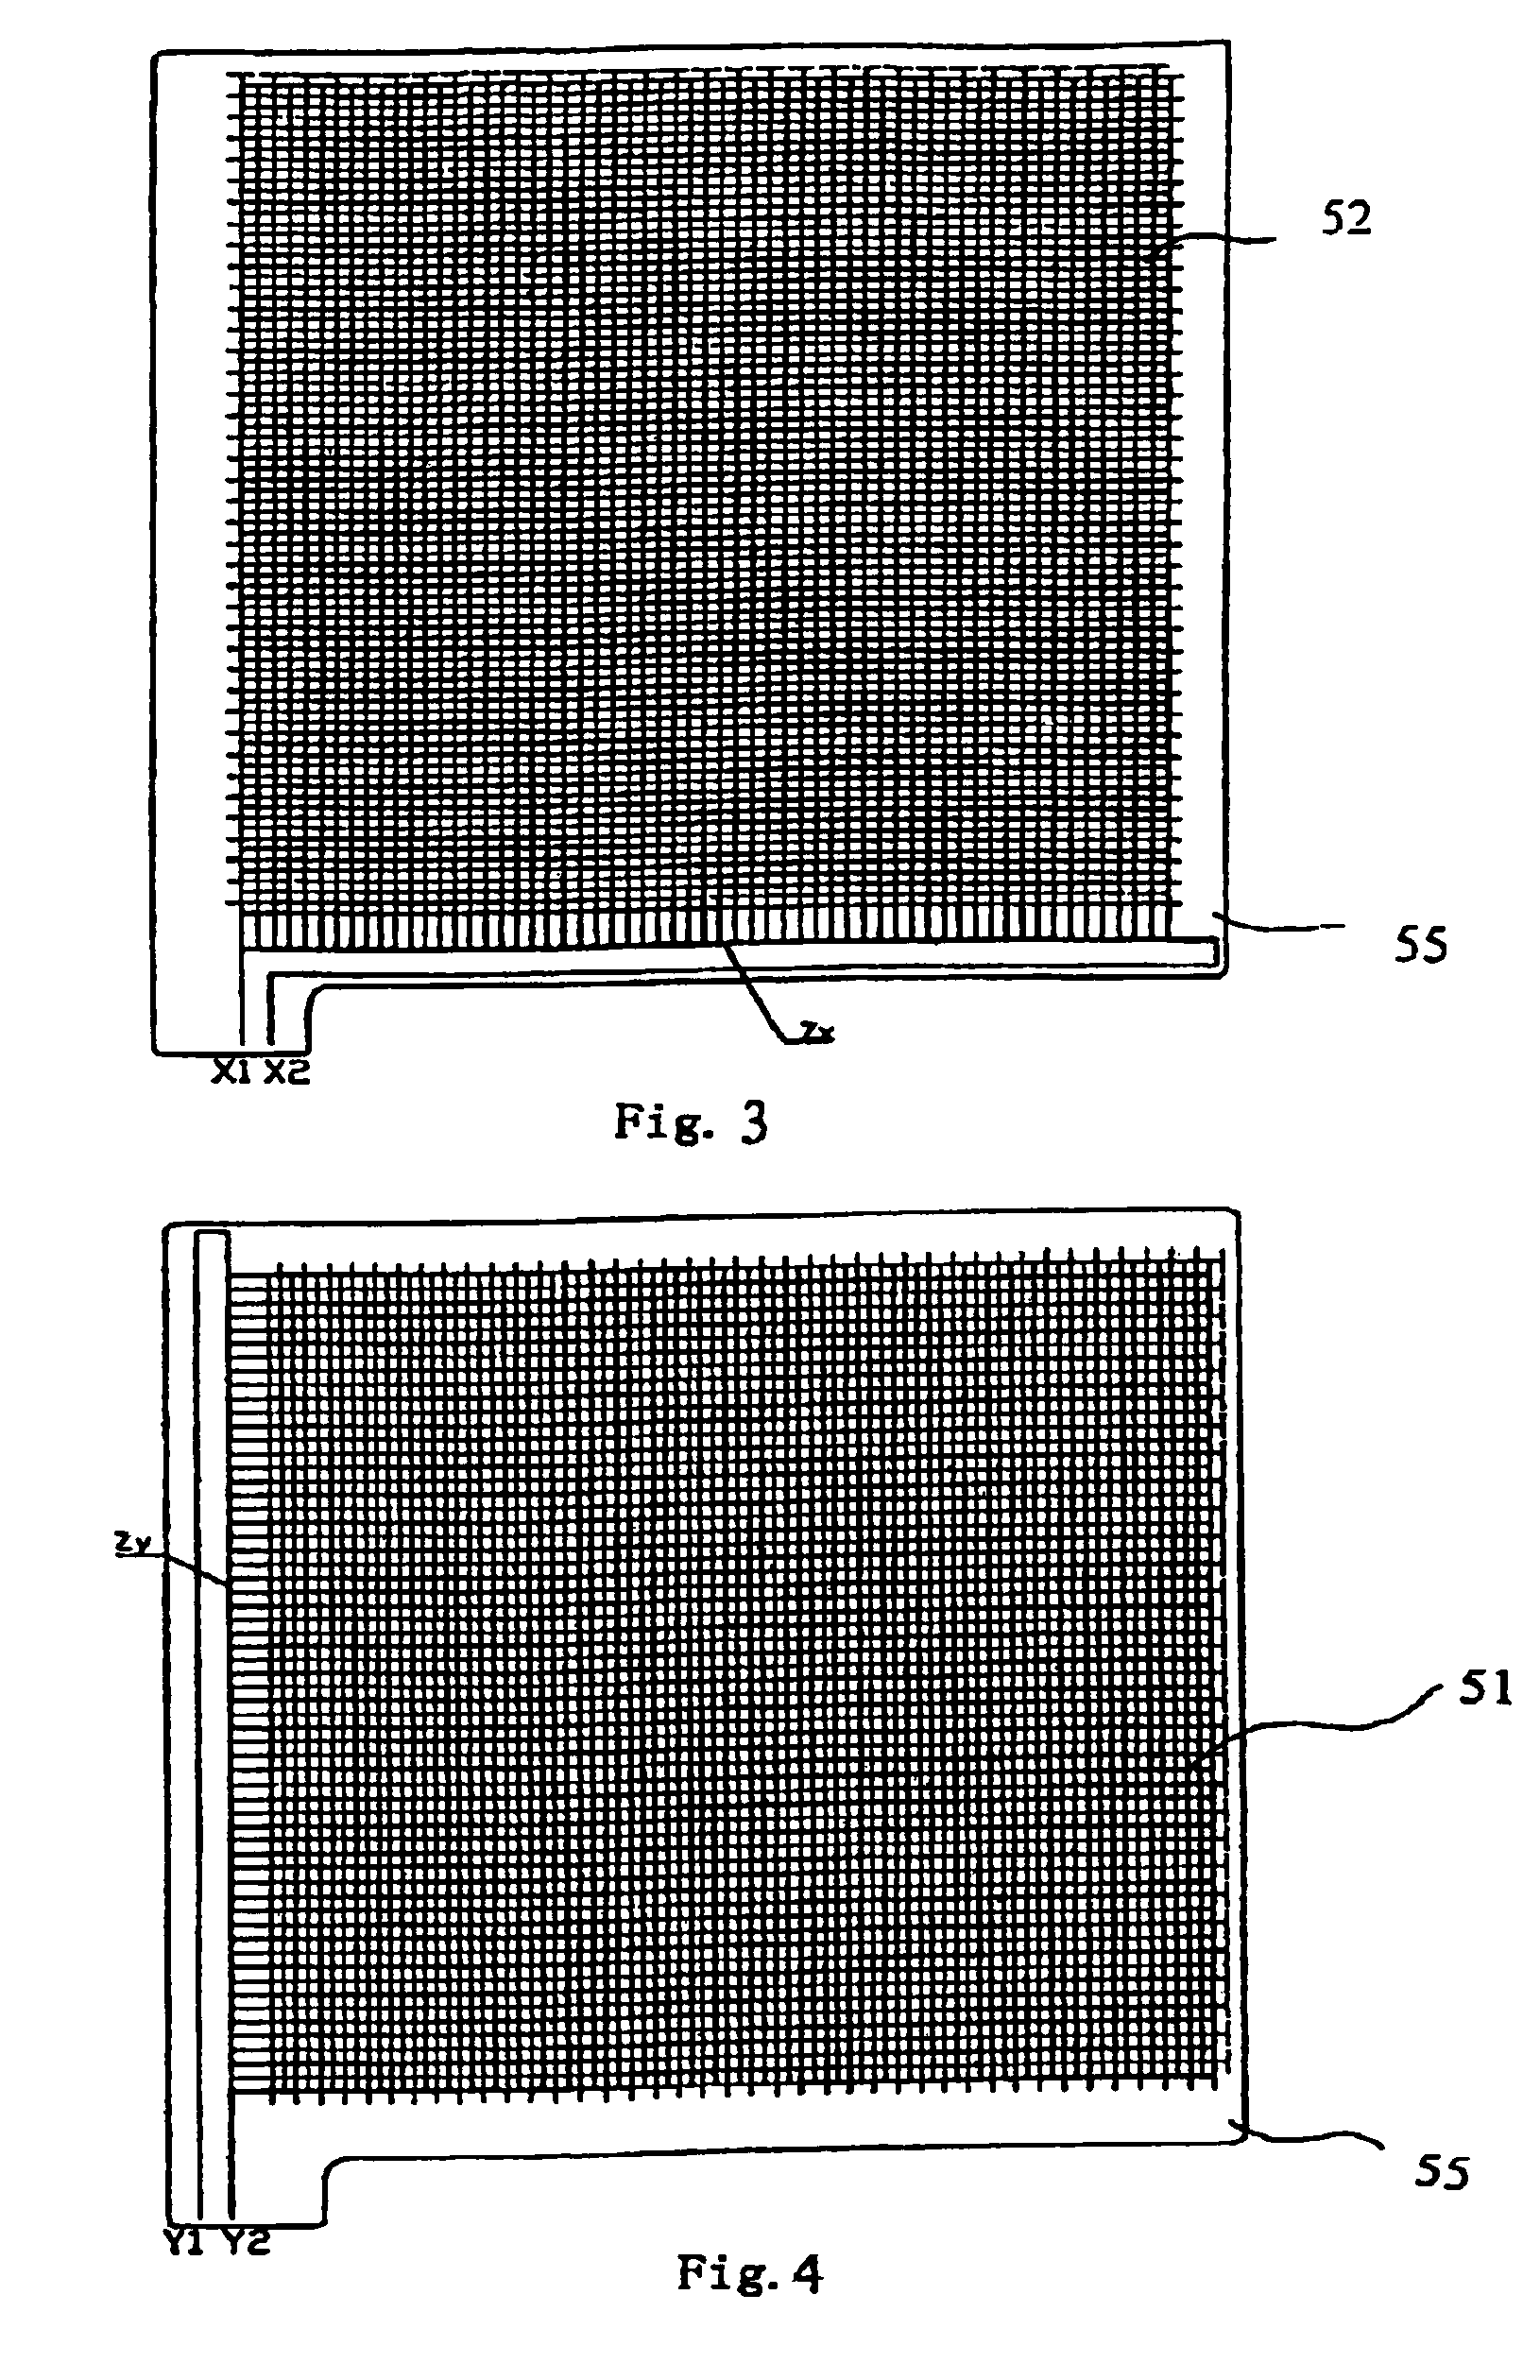 Touch control display screen with a built-in electromagnet induction layer of septum array grids